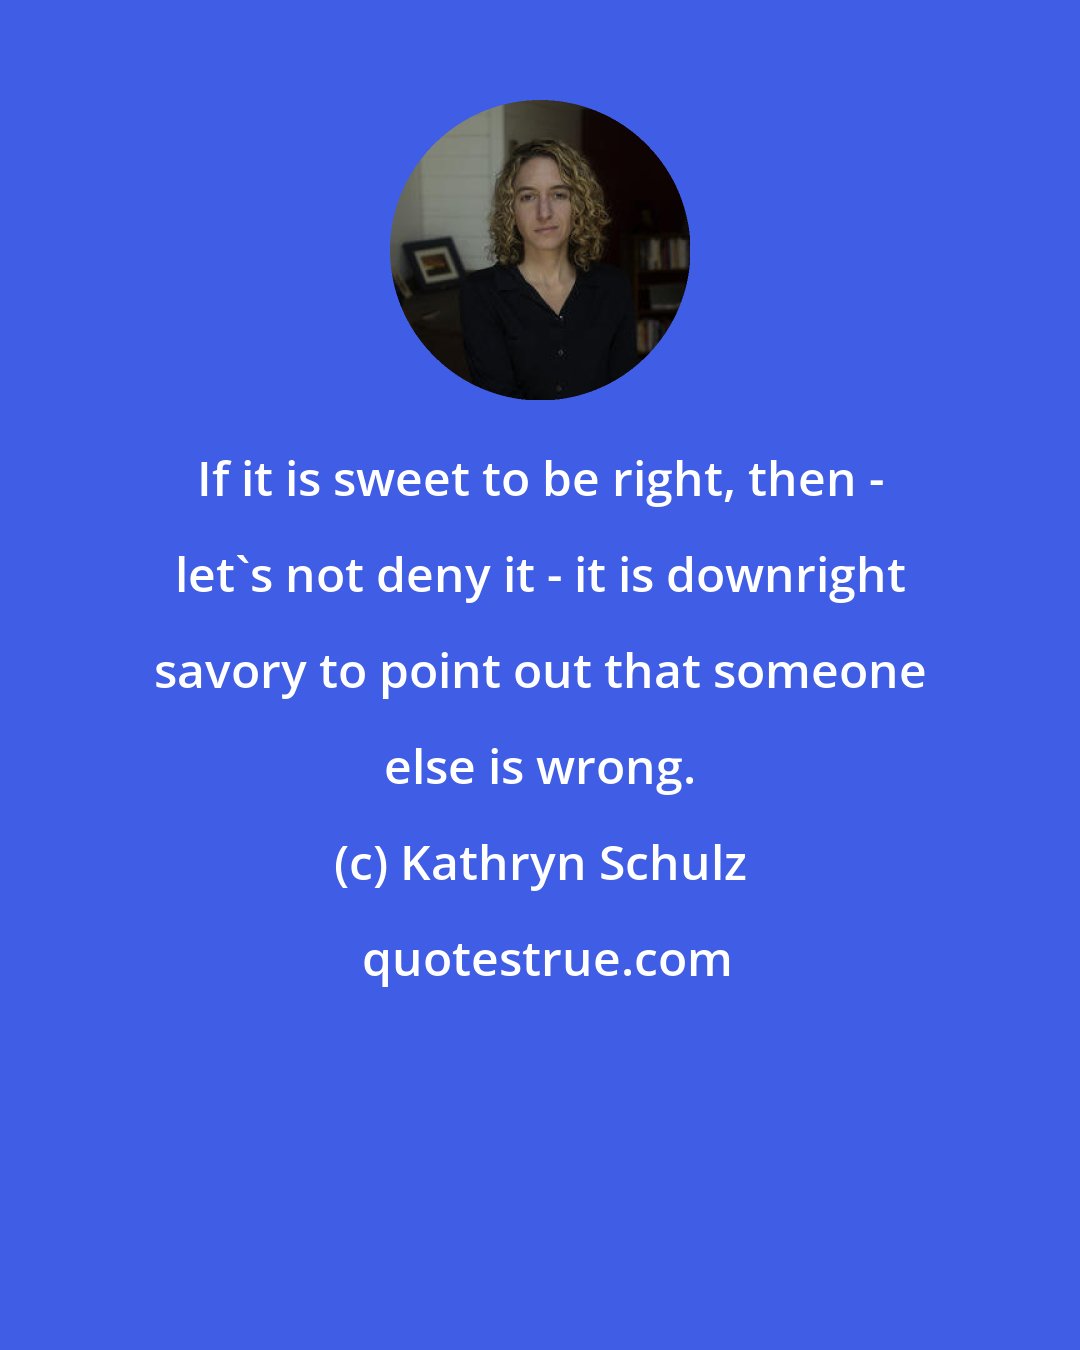 Kathryn Schulz: If it is sweet to be right, then - let's not deny it - it is downright savory to point out that someone else is wrong.